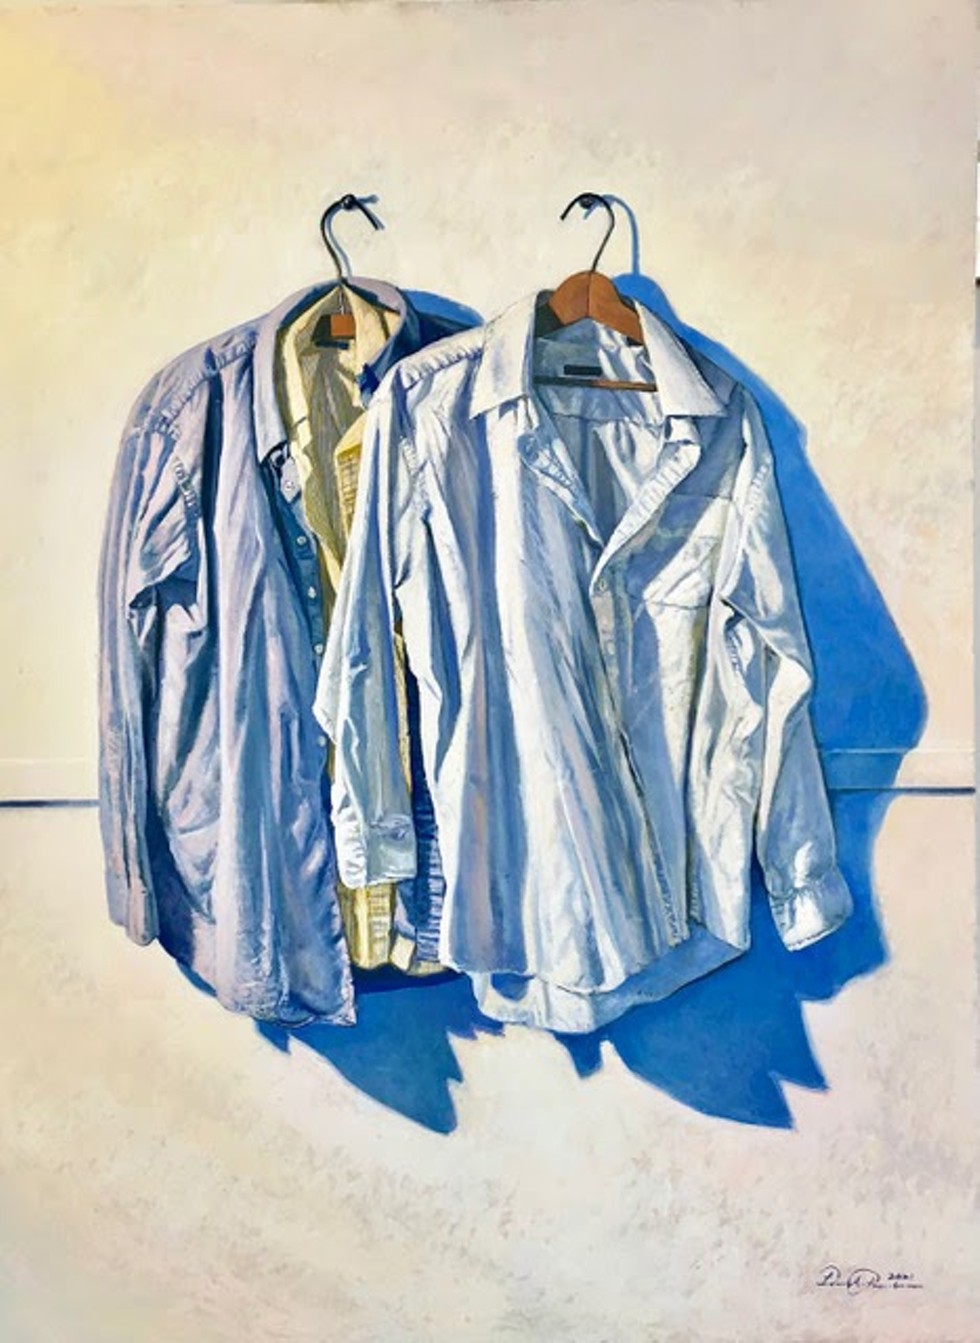 Eric Forstmann, "Two One," 2021, oil on board, 48 x 36 in.